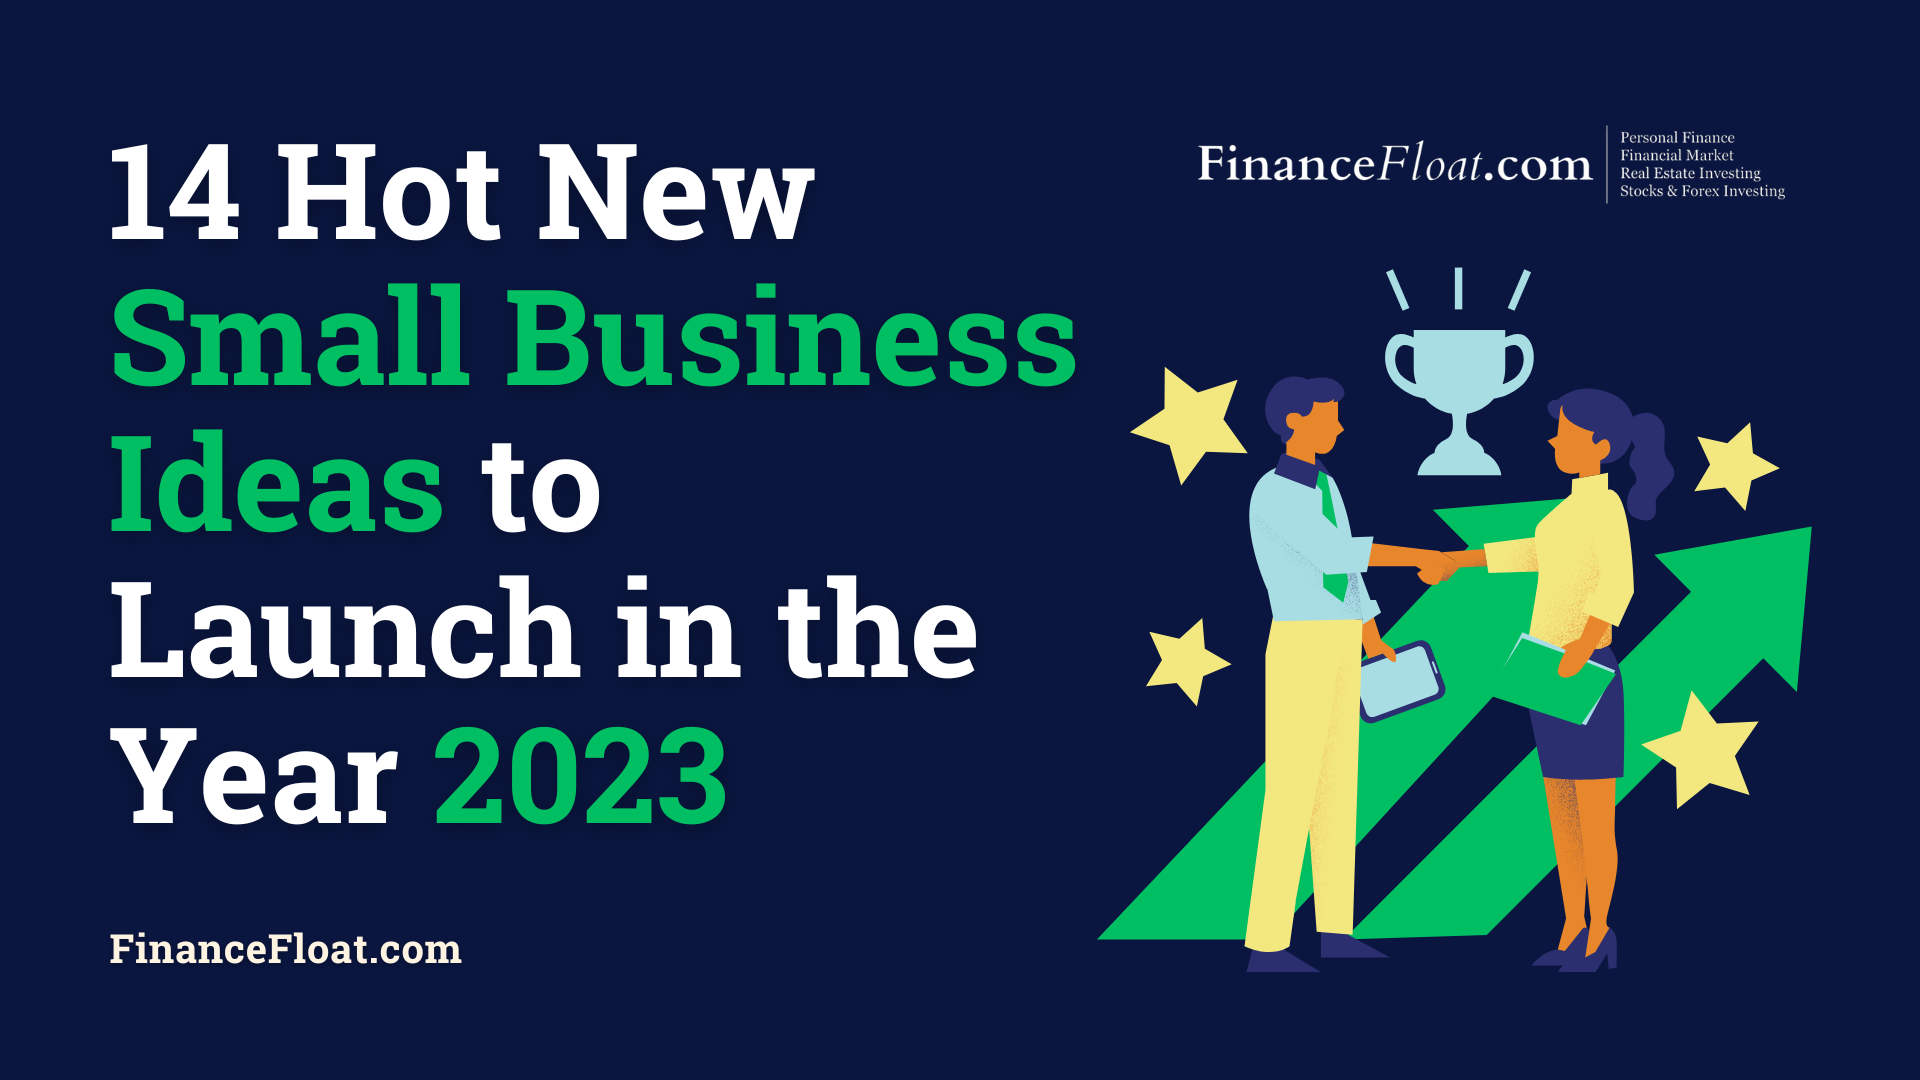 14 Hot New Small Business Ideas to Launch in the Year 2023